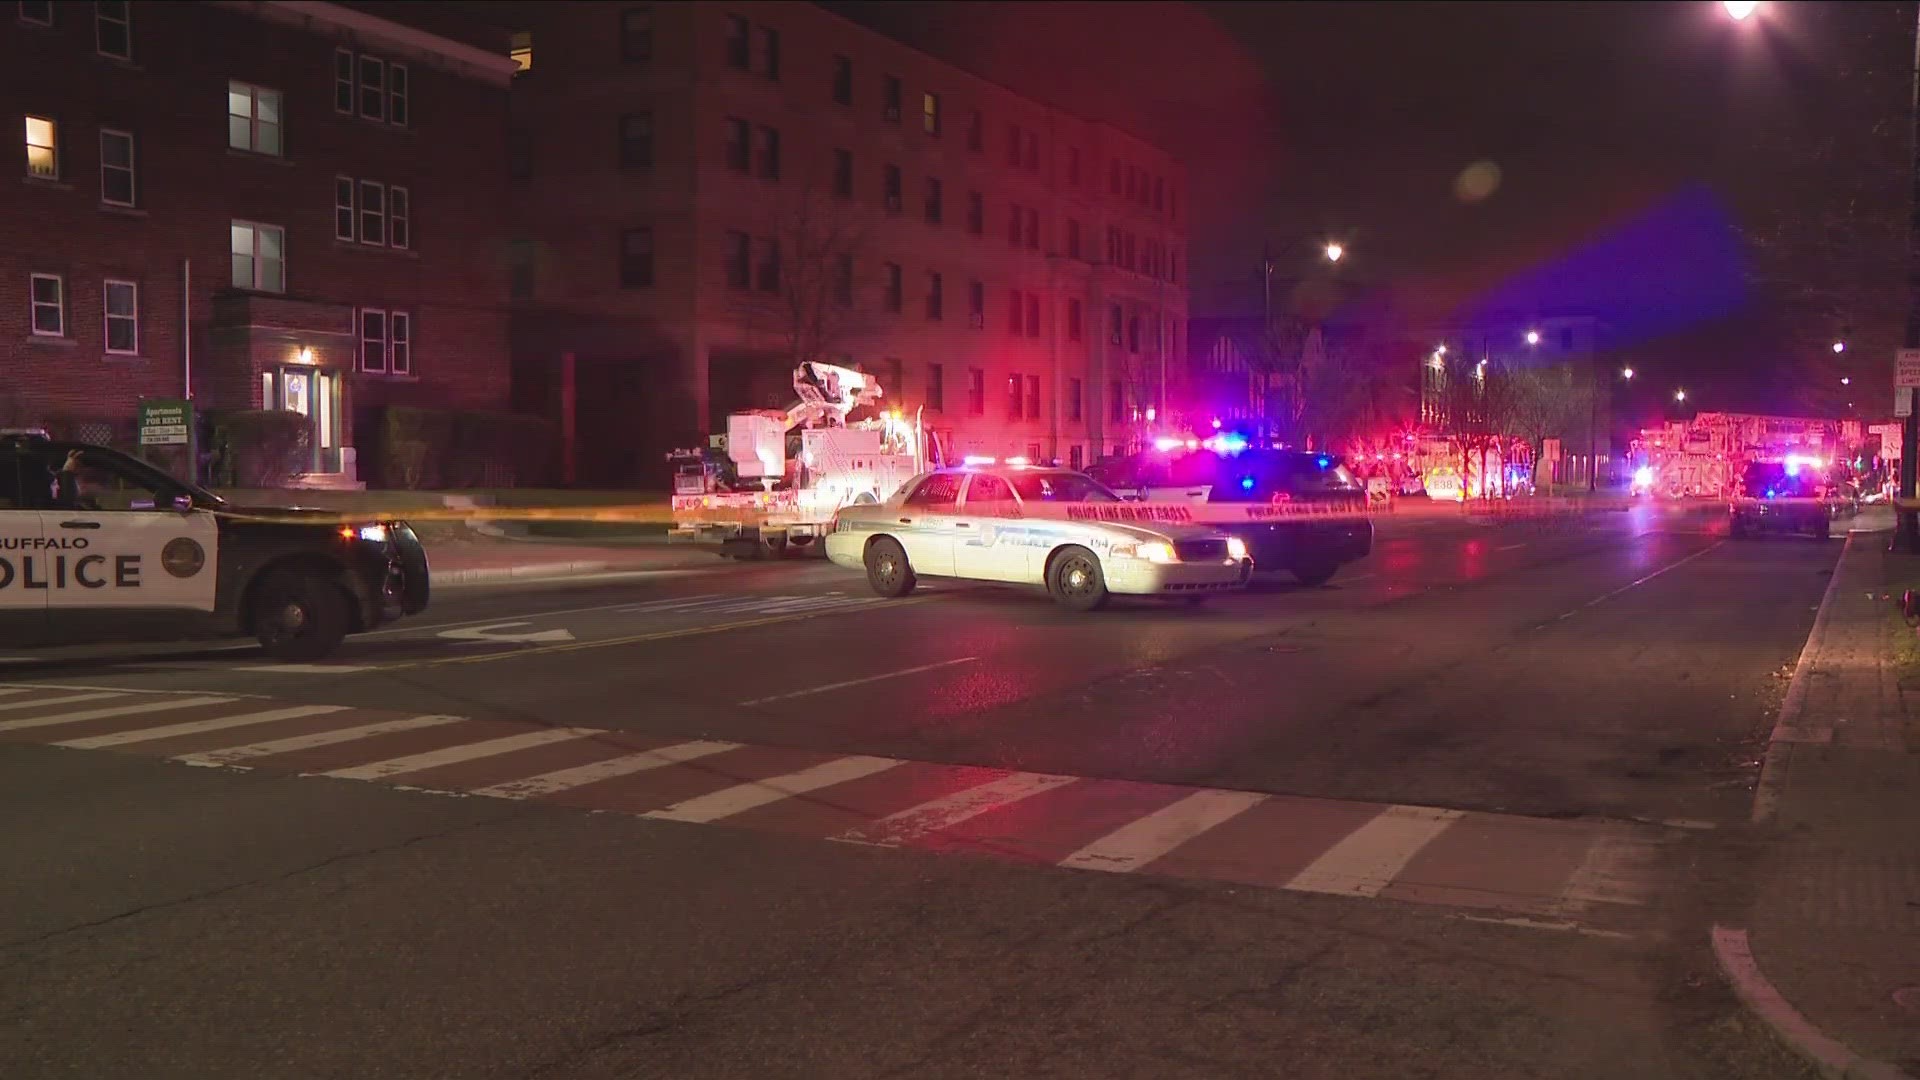 Buffalo Police confirmed Monday afternoon that an 18-year-old died at the scene.